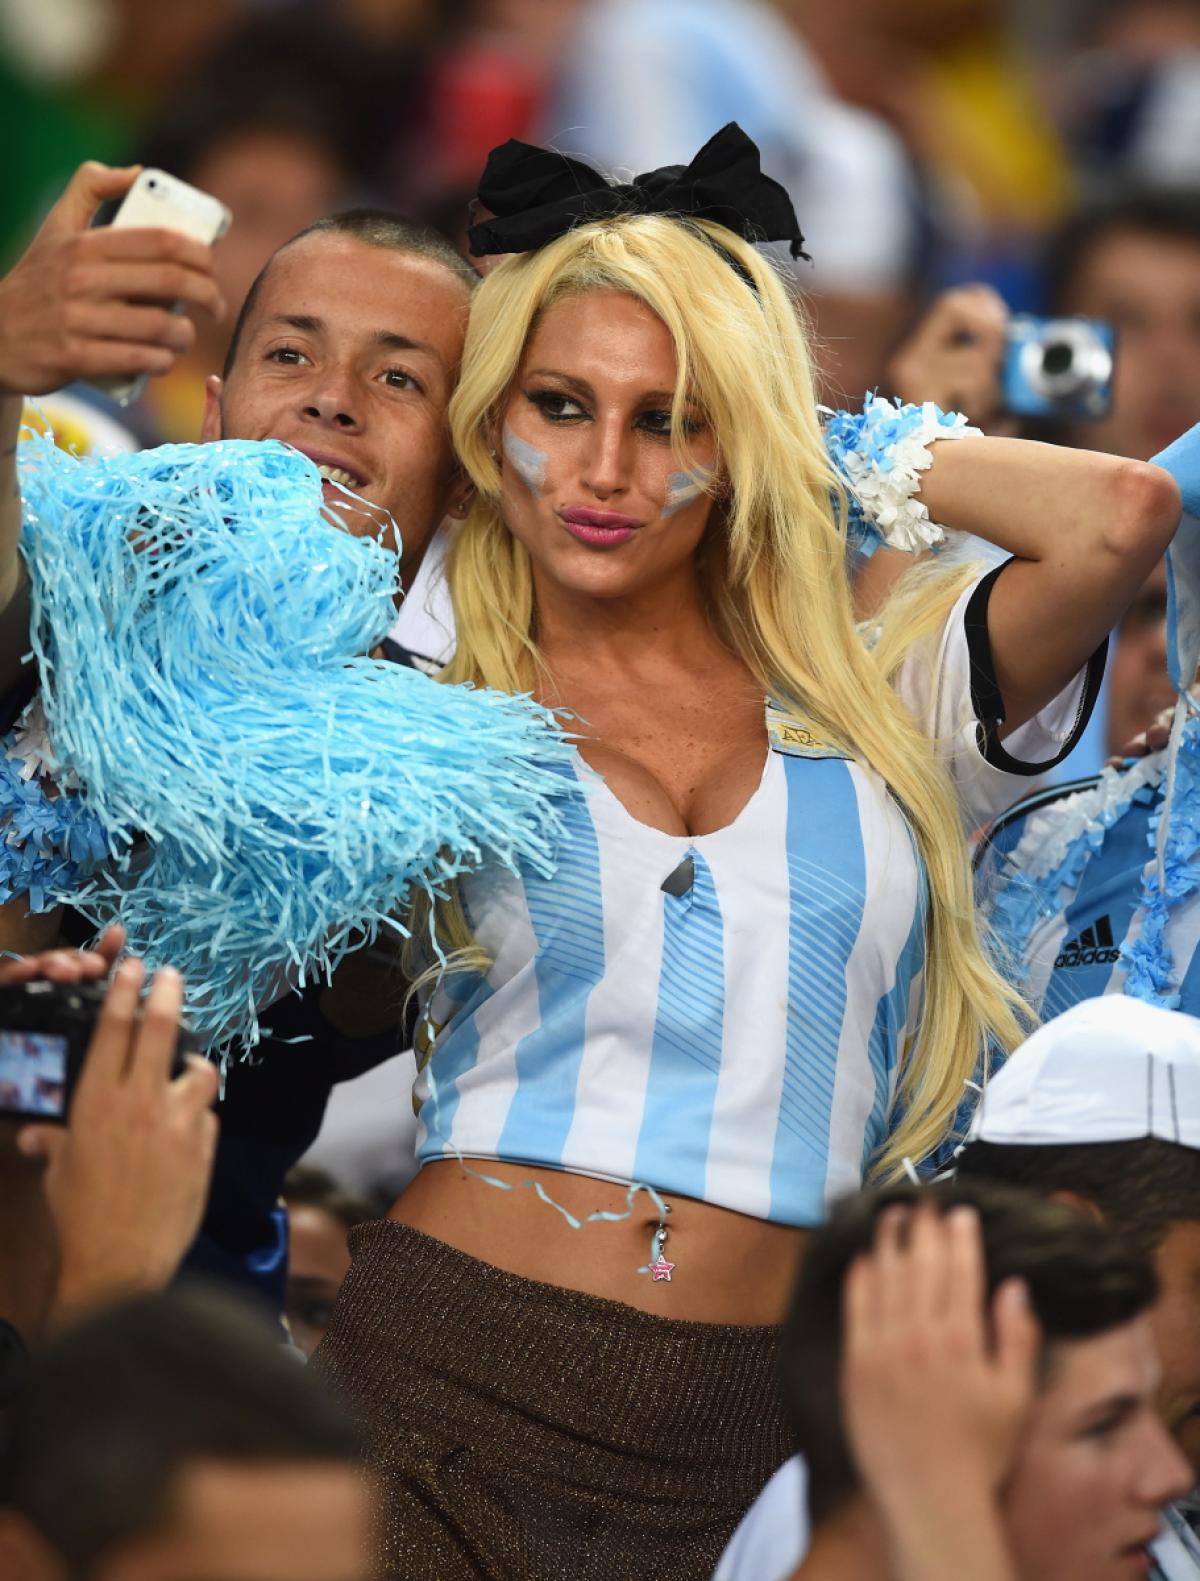 26 Hottest Fans Of The World Cup - Pop Culture Gallery | eBaum's World